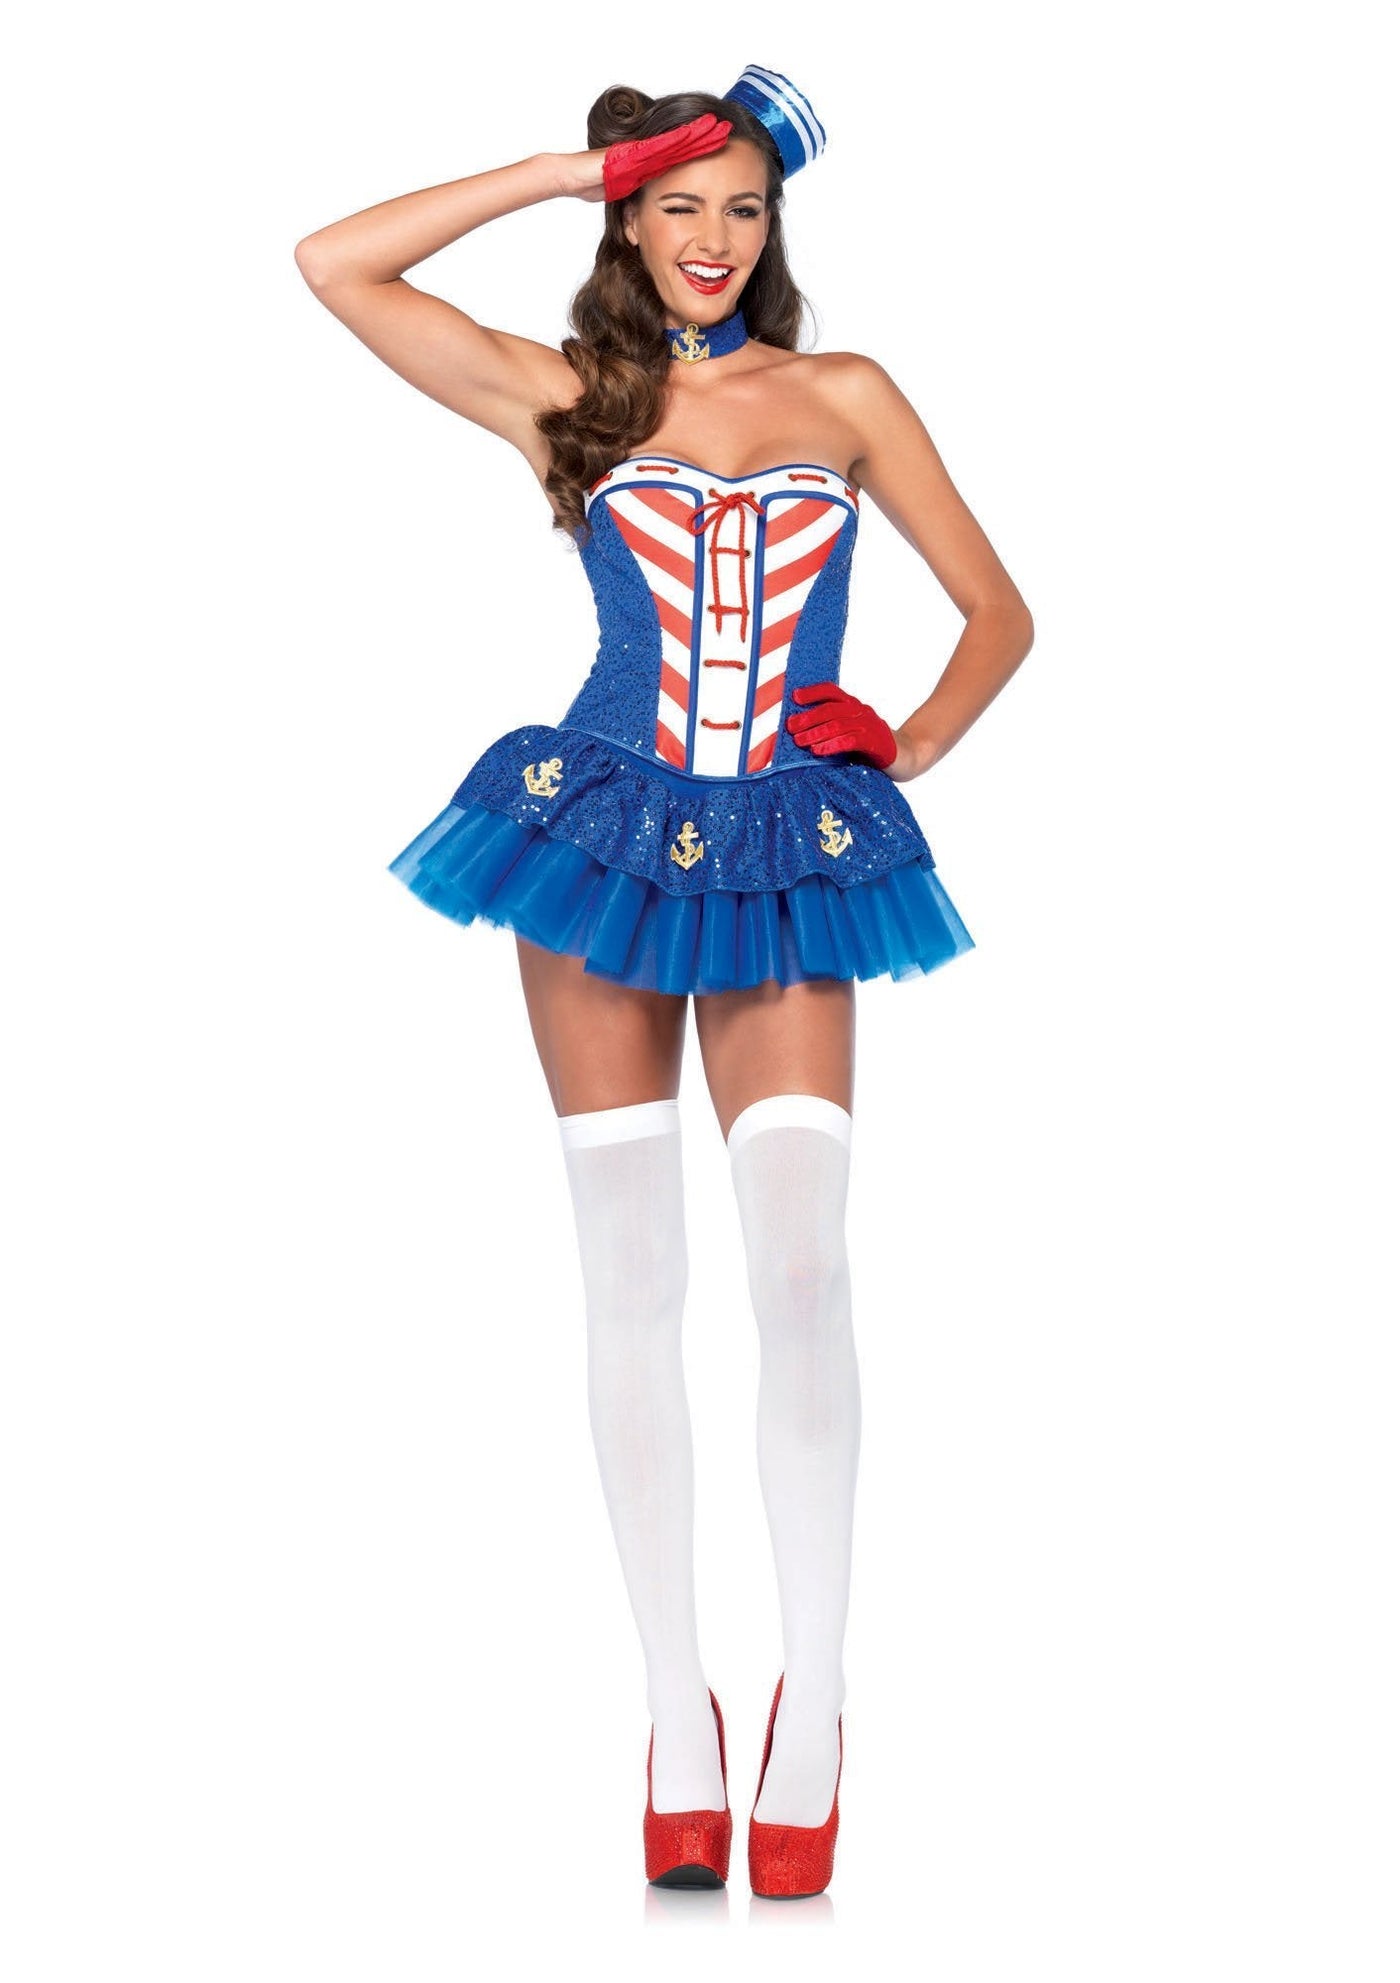 Starboard Sweetie Costume - JJ's Party House